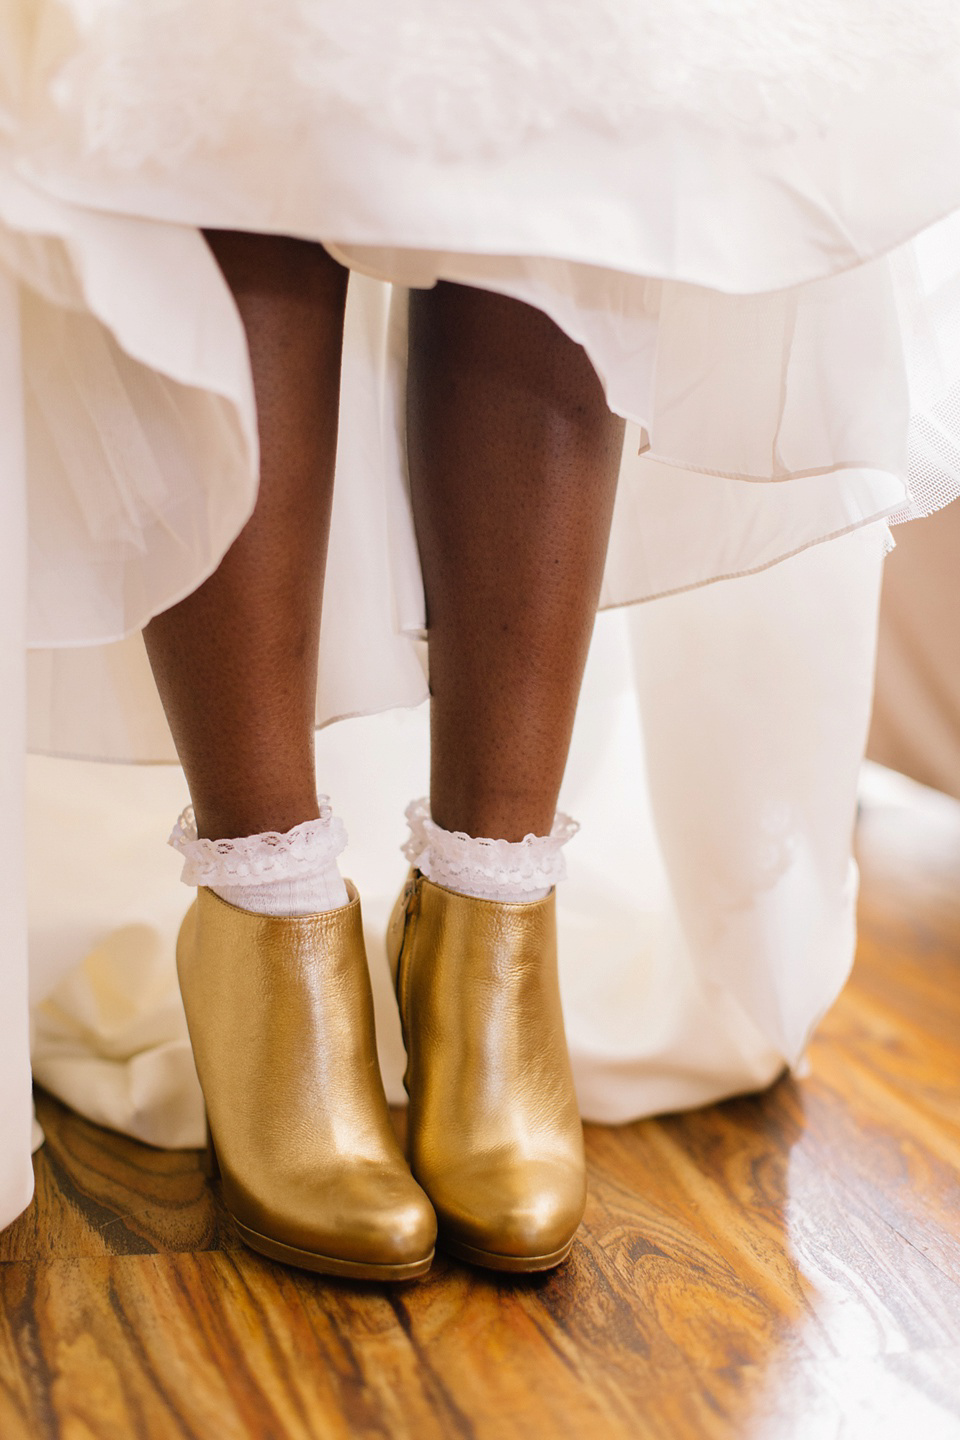 Maggie Sottero and Gold Bootees For a Joyful Wedding at Northbrook Park. Images by M&J Photography.